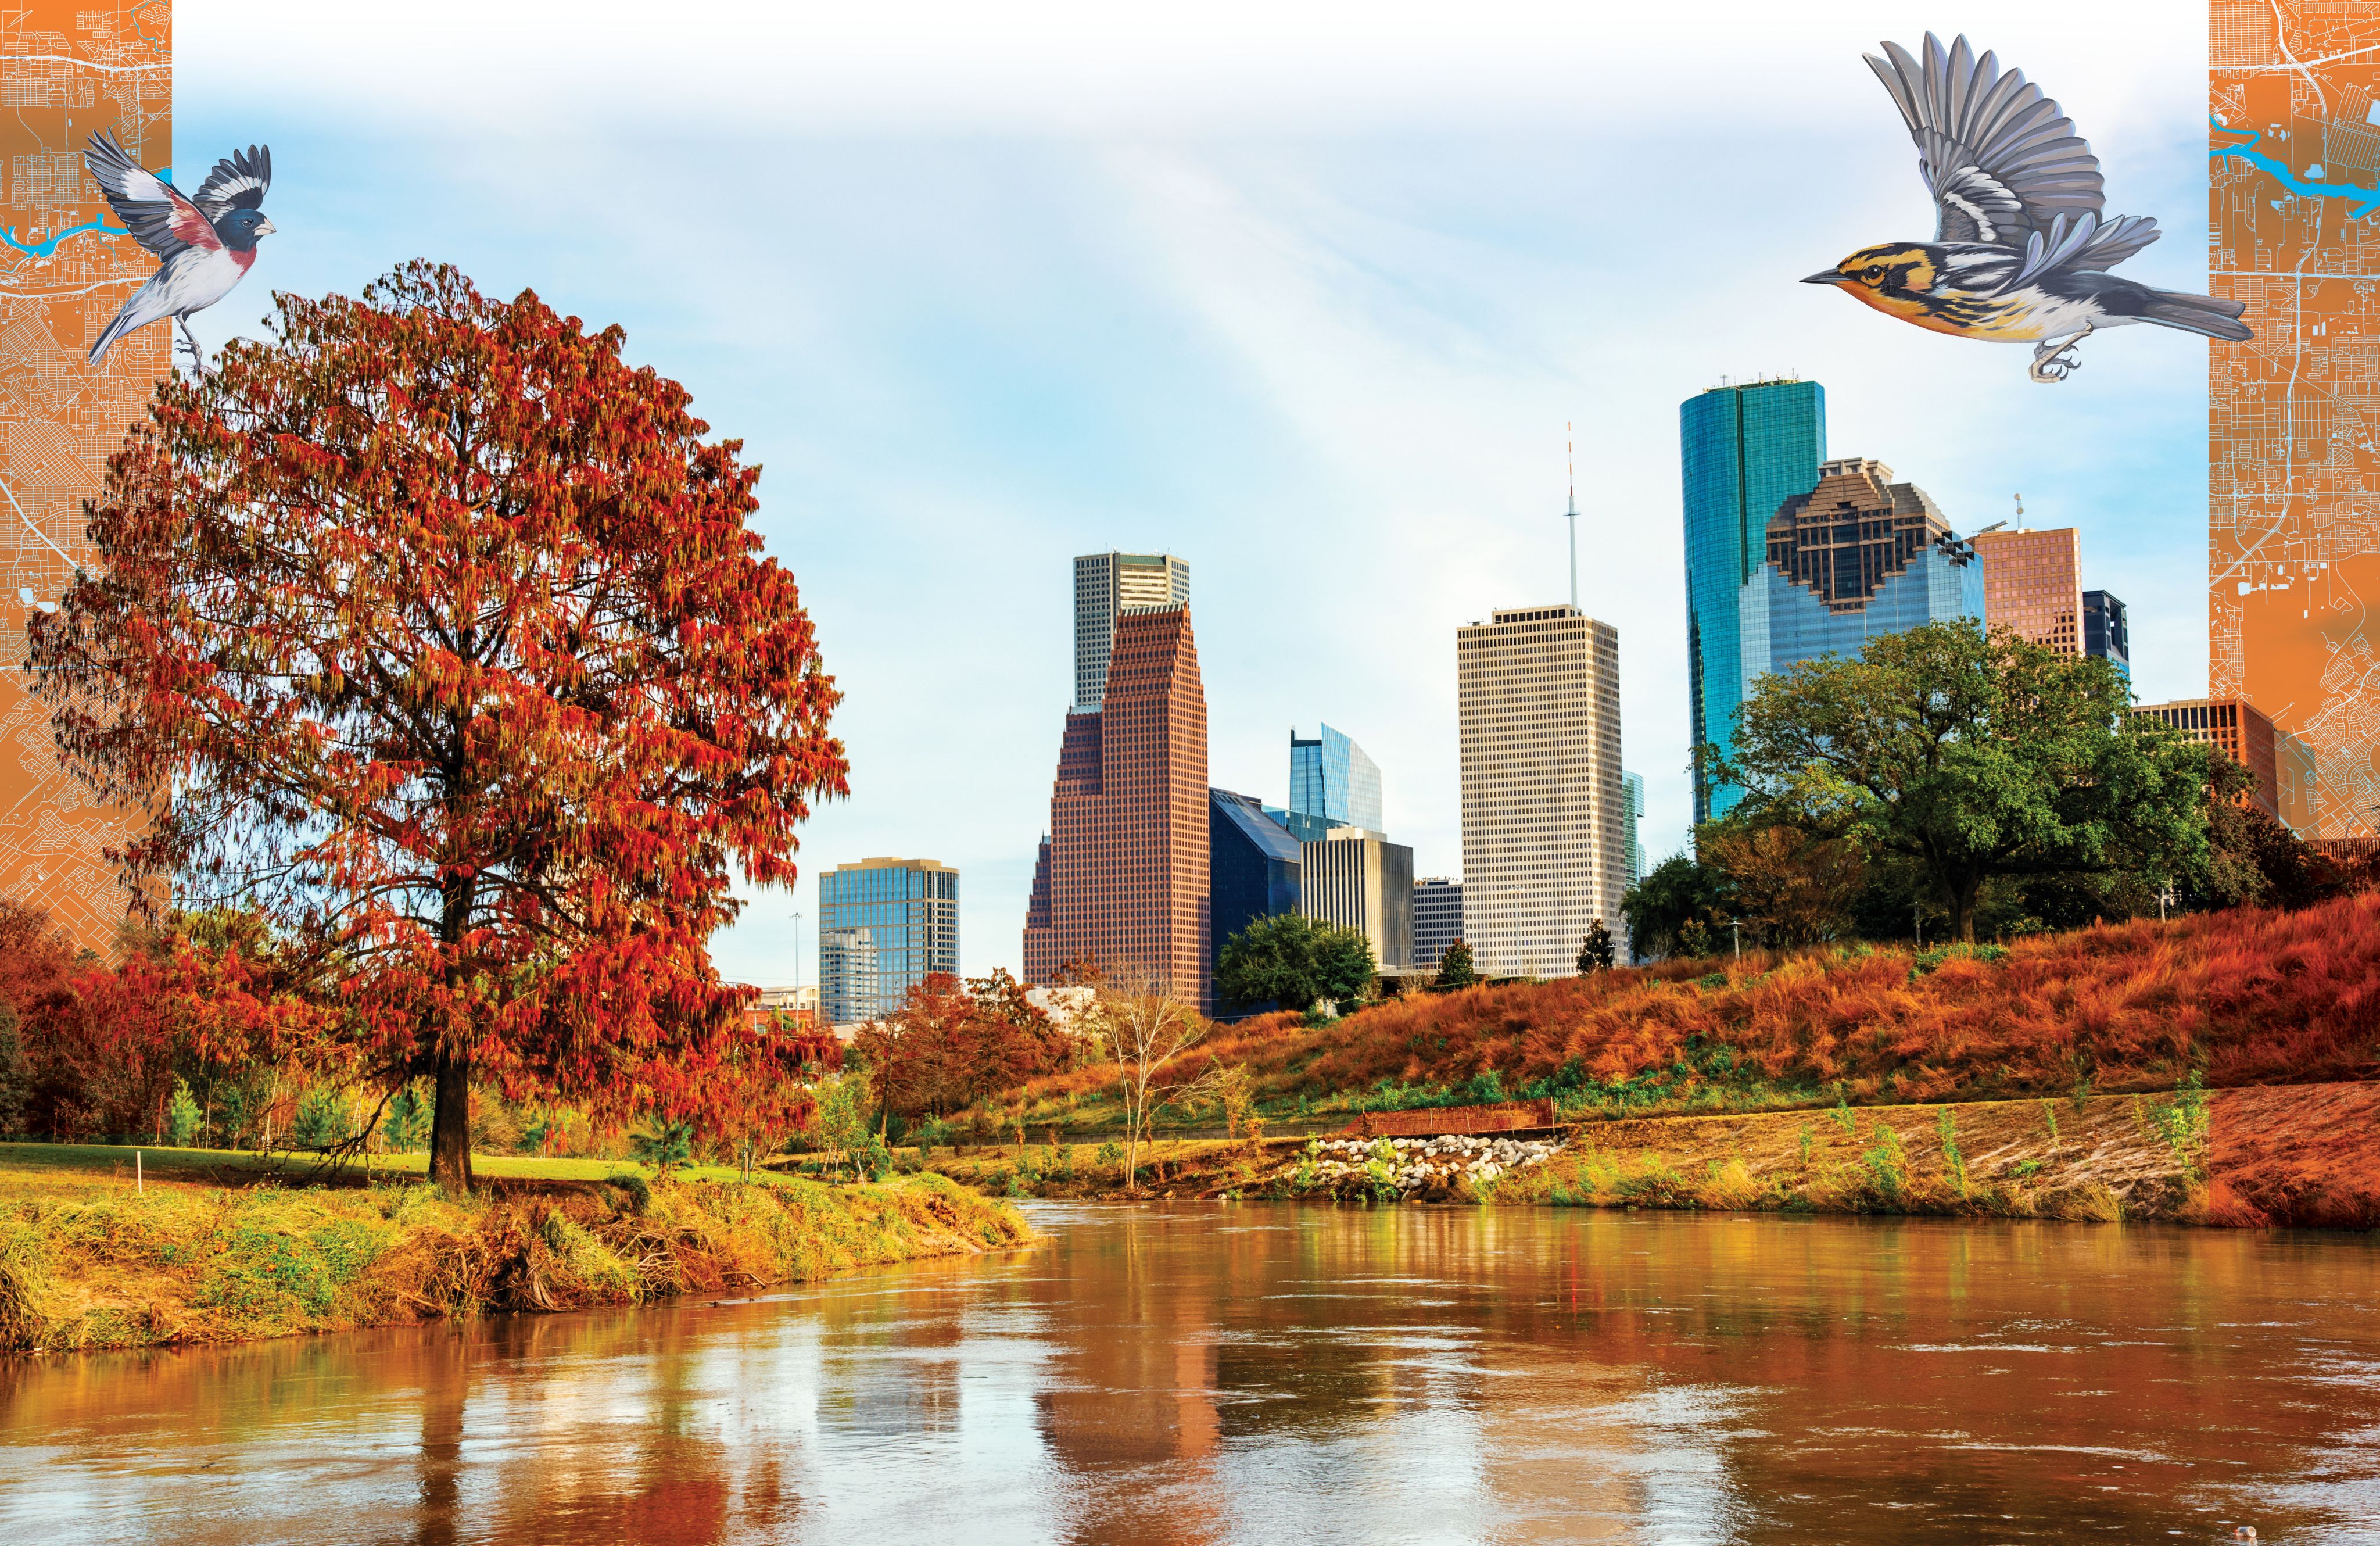 The Houston Skyline in the fall with illustration of birds layered on top.